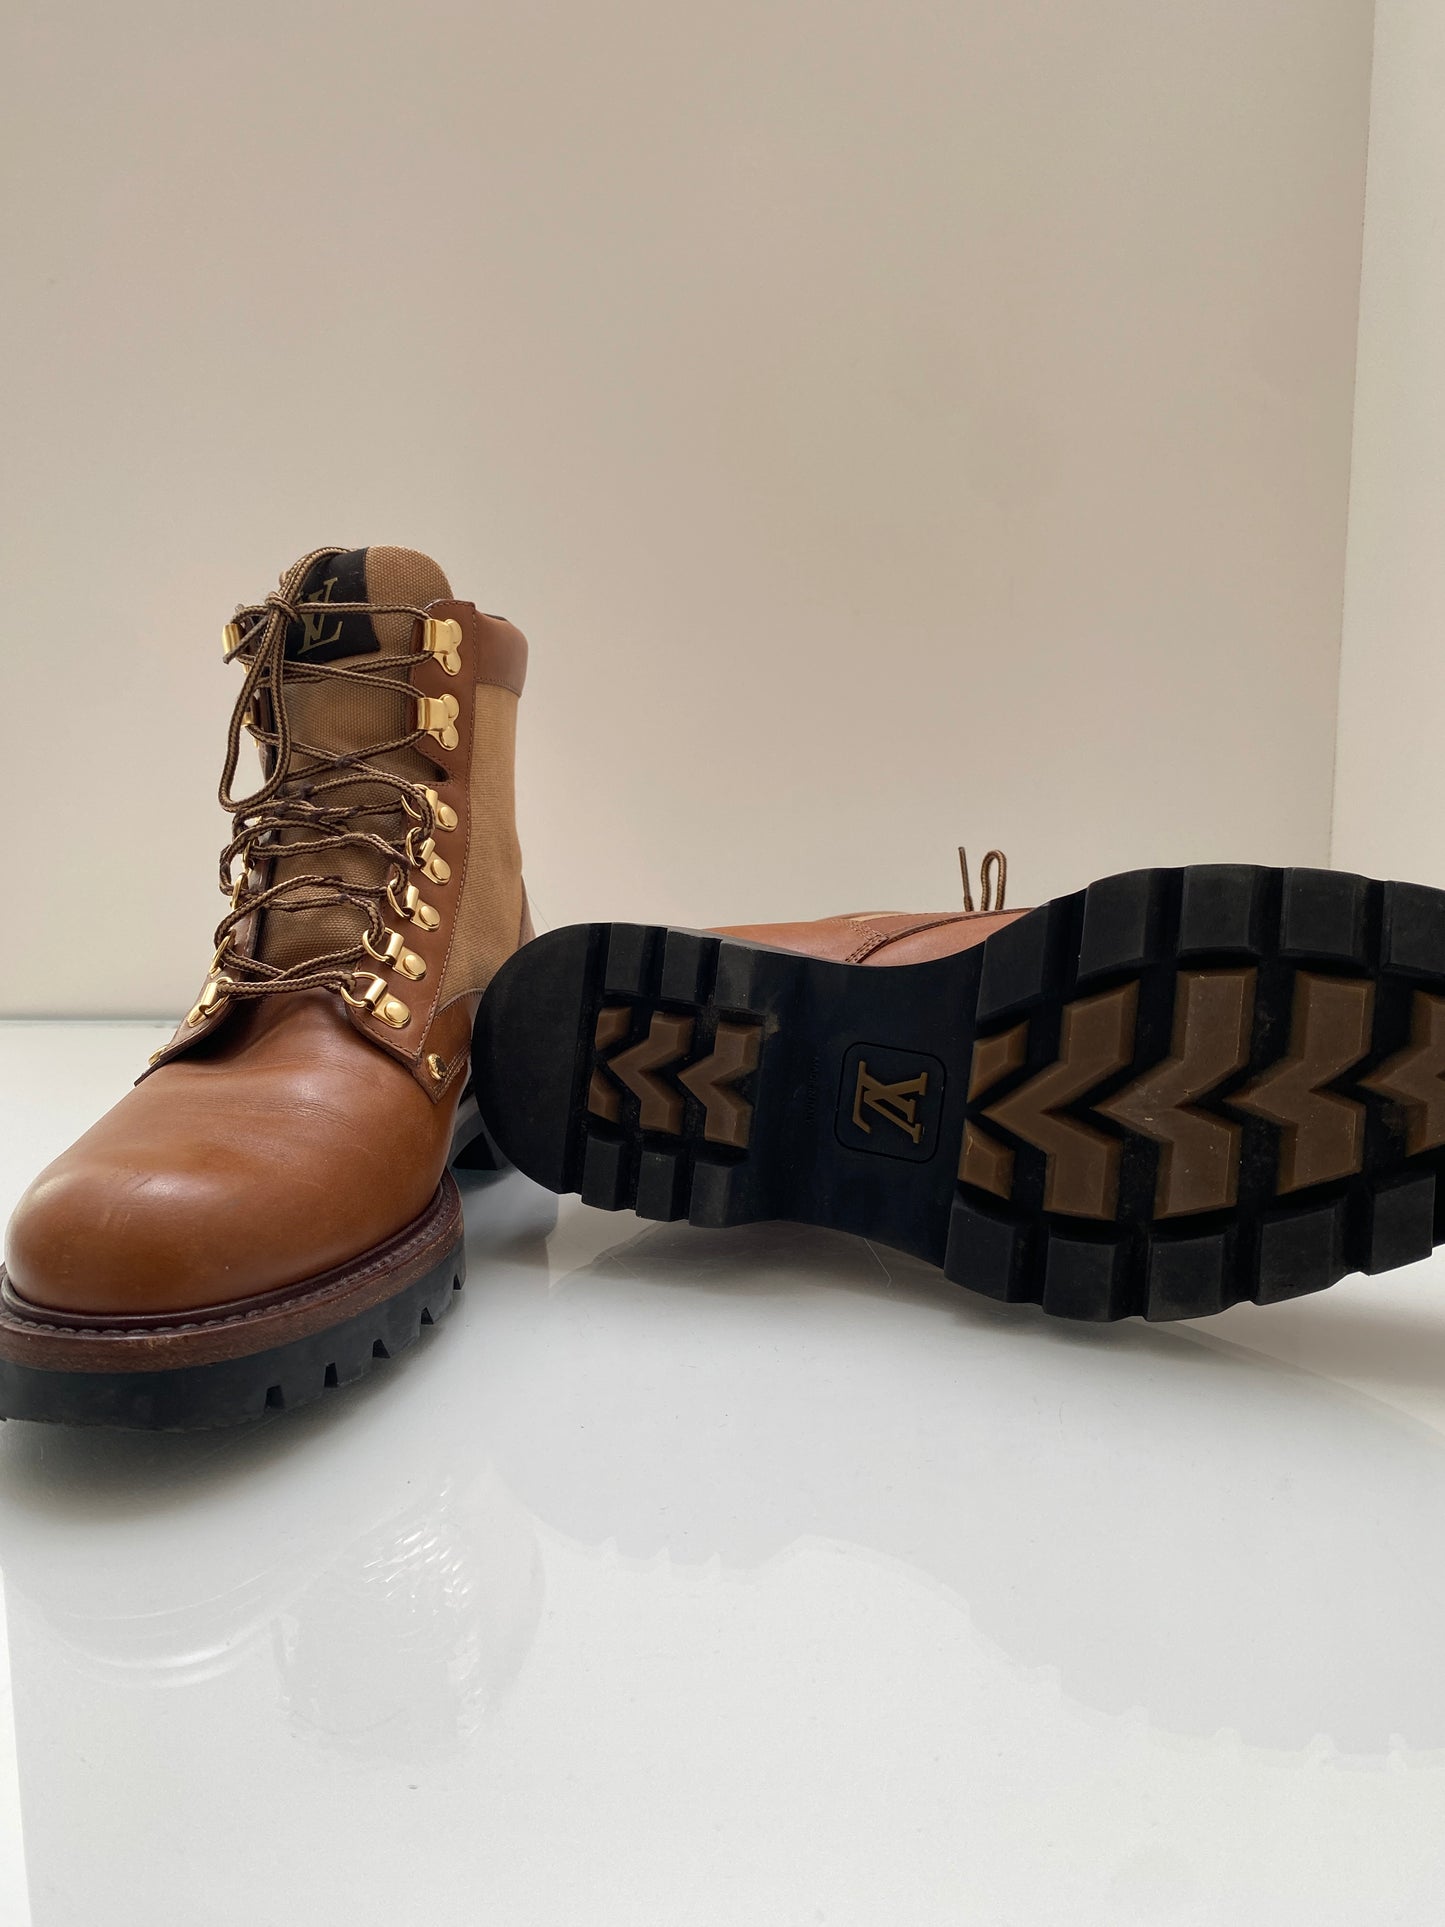 Louis Vuitton Brown Leather Hiking Boots w Patches, 8.5